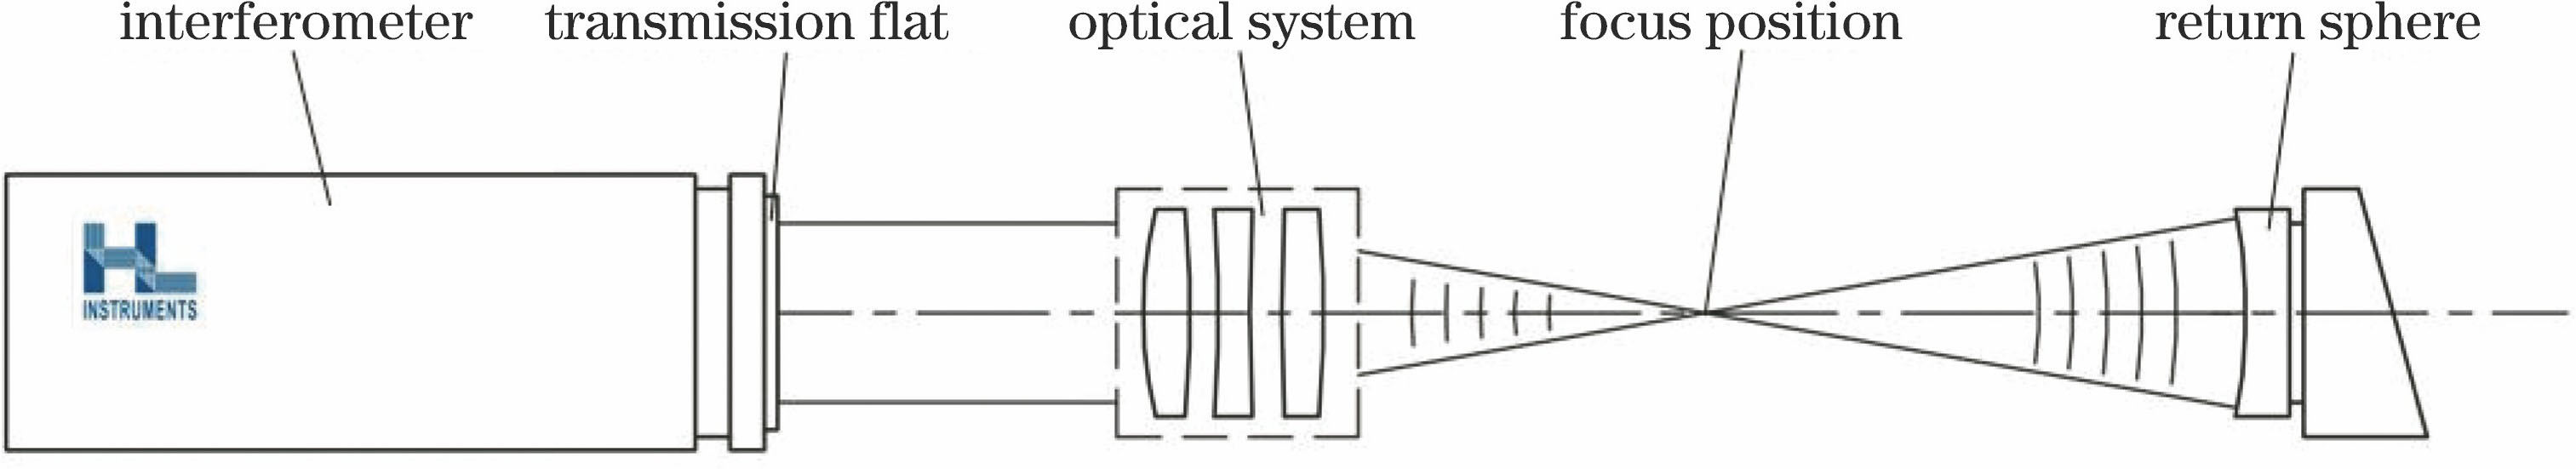 Optical system testing at infinite distance